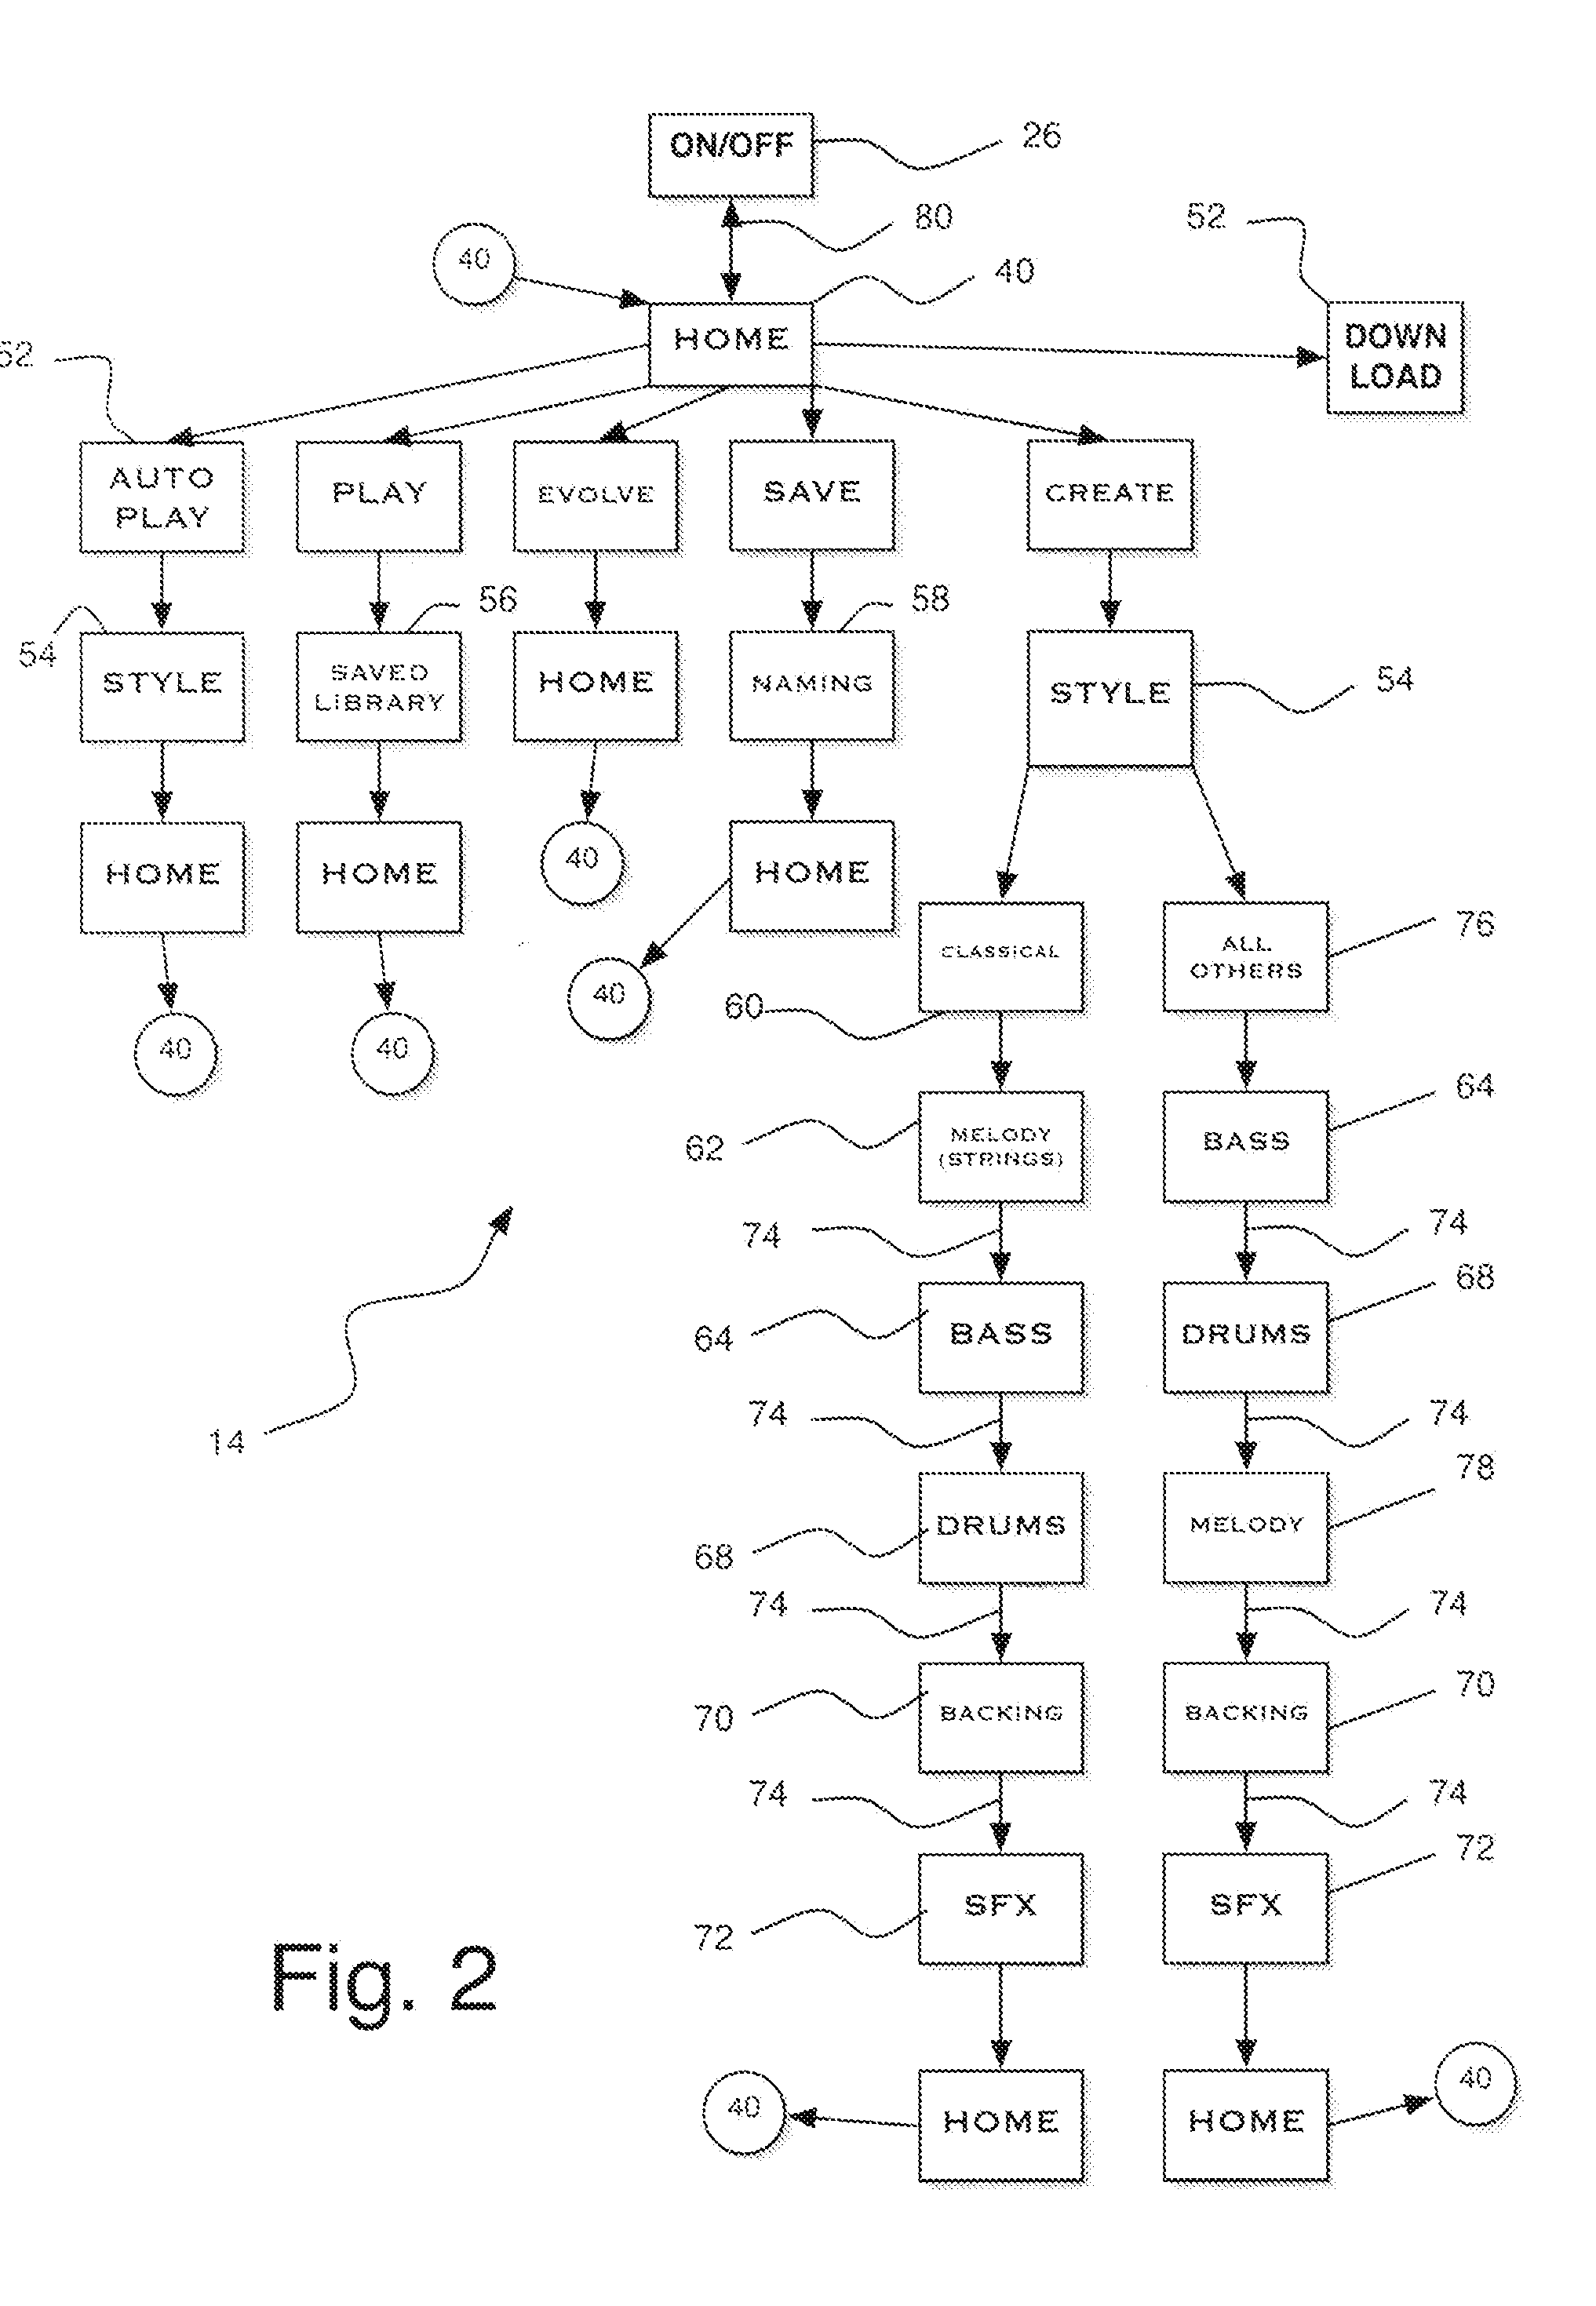 Digital Music Composition Device, Composition Software and Method of Use